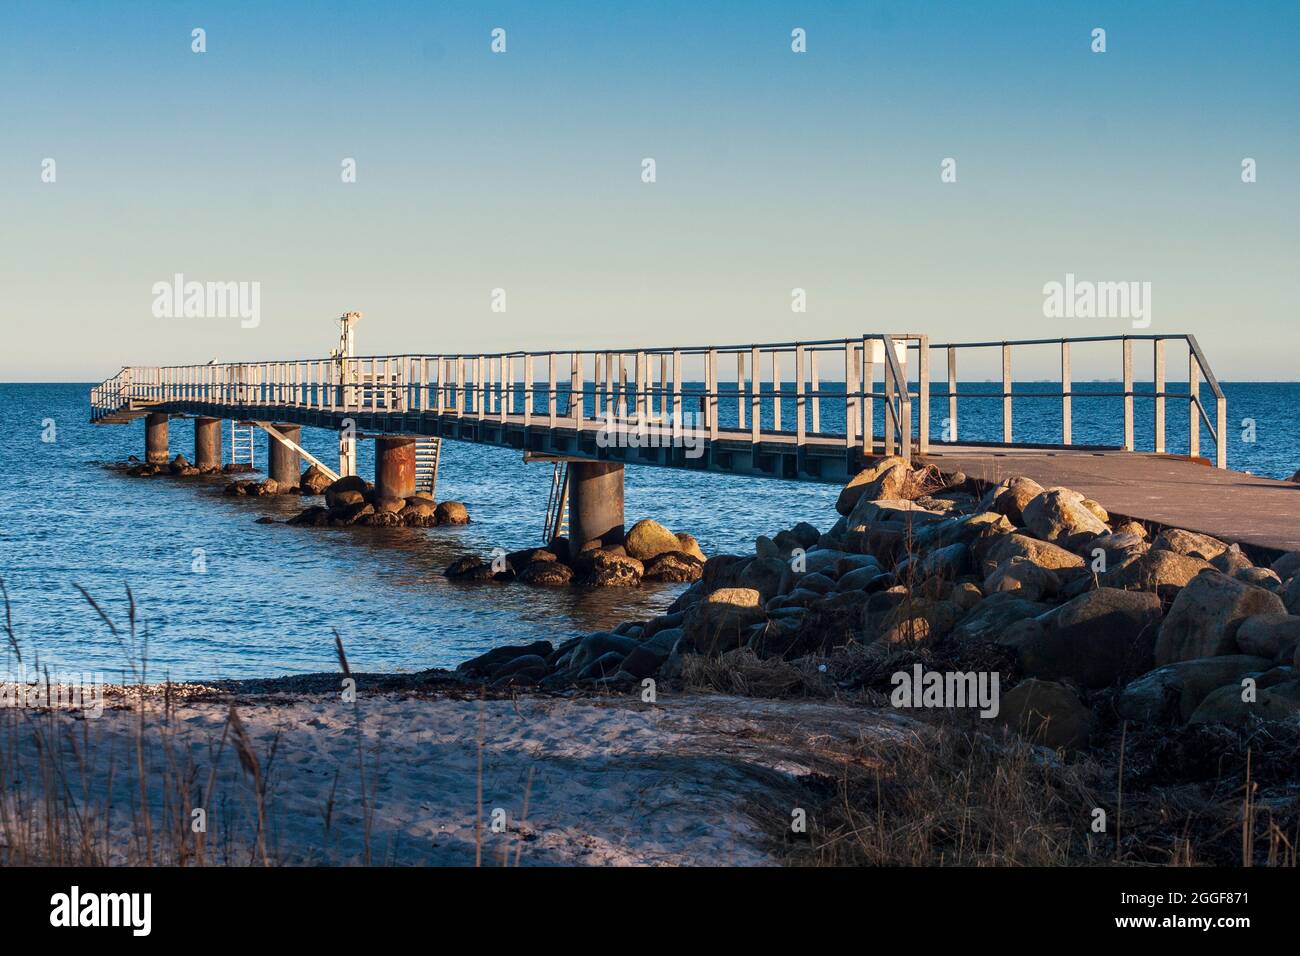 Bathing jetty with lift for disabled persons Stock Photo